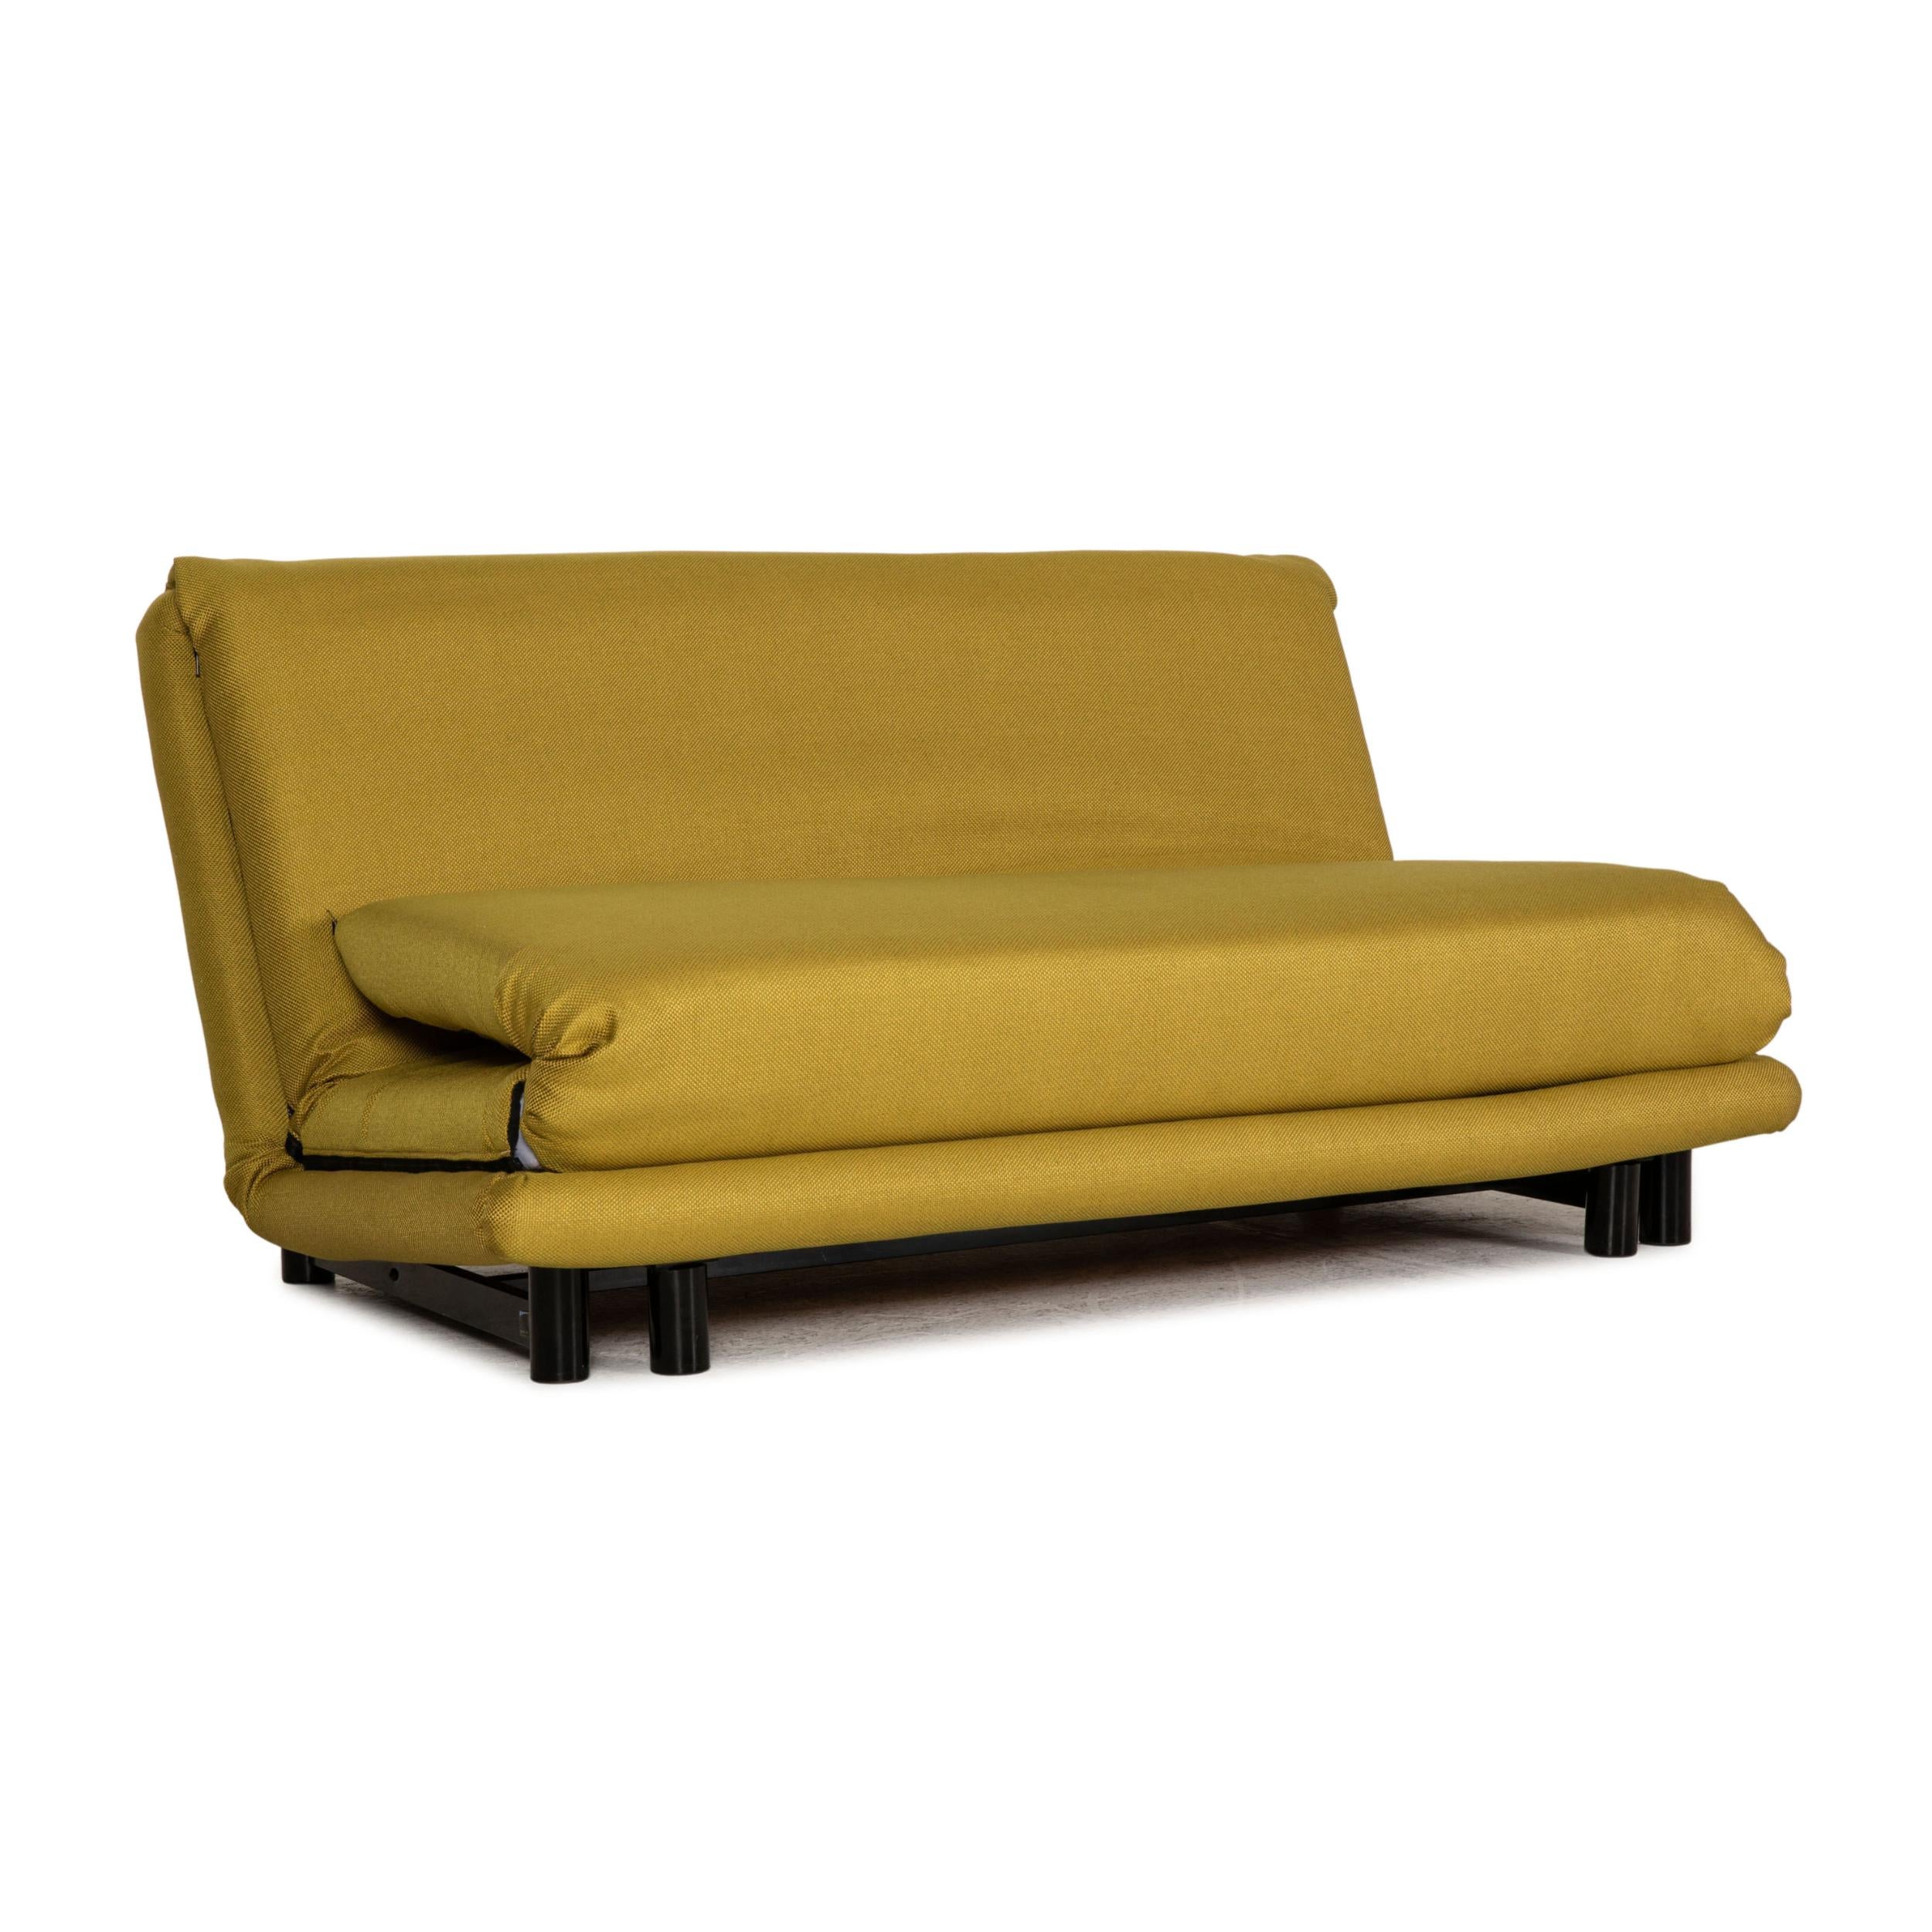 Contemporary Ligne Roset Multy Fabric Sofa Yellow Three-Seater Couch Function Sleeping For Sale